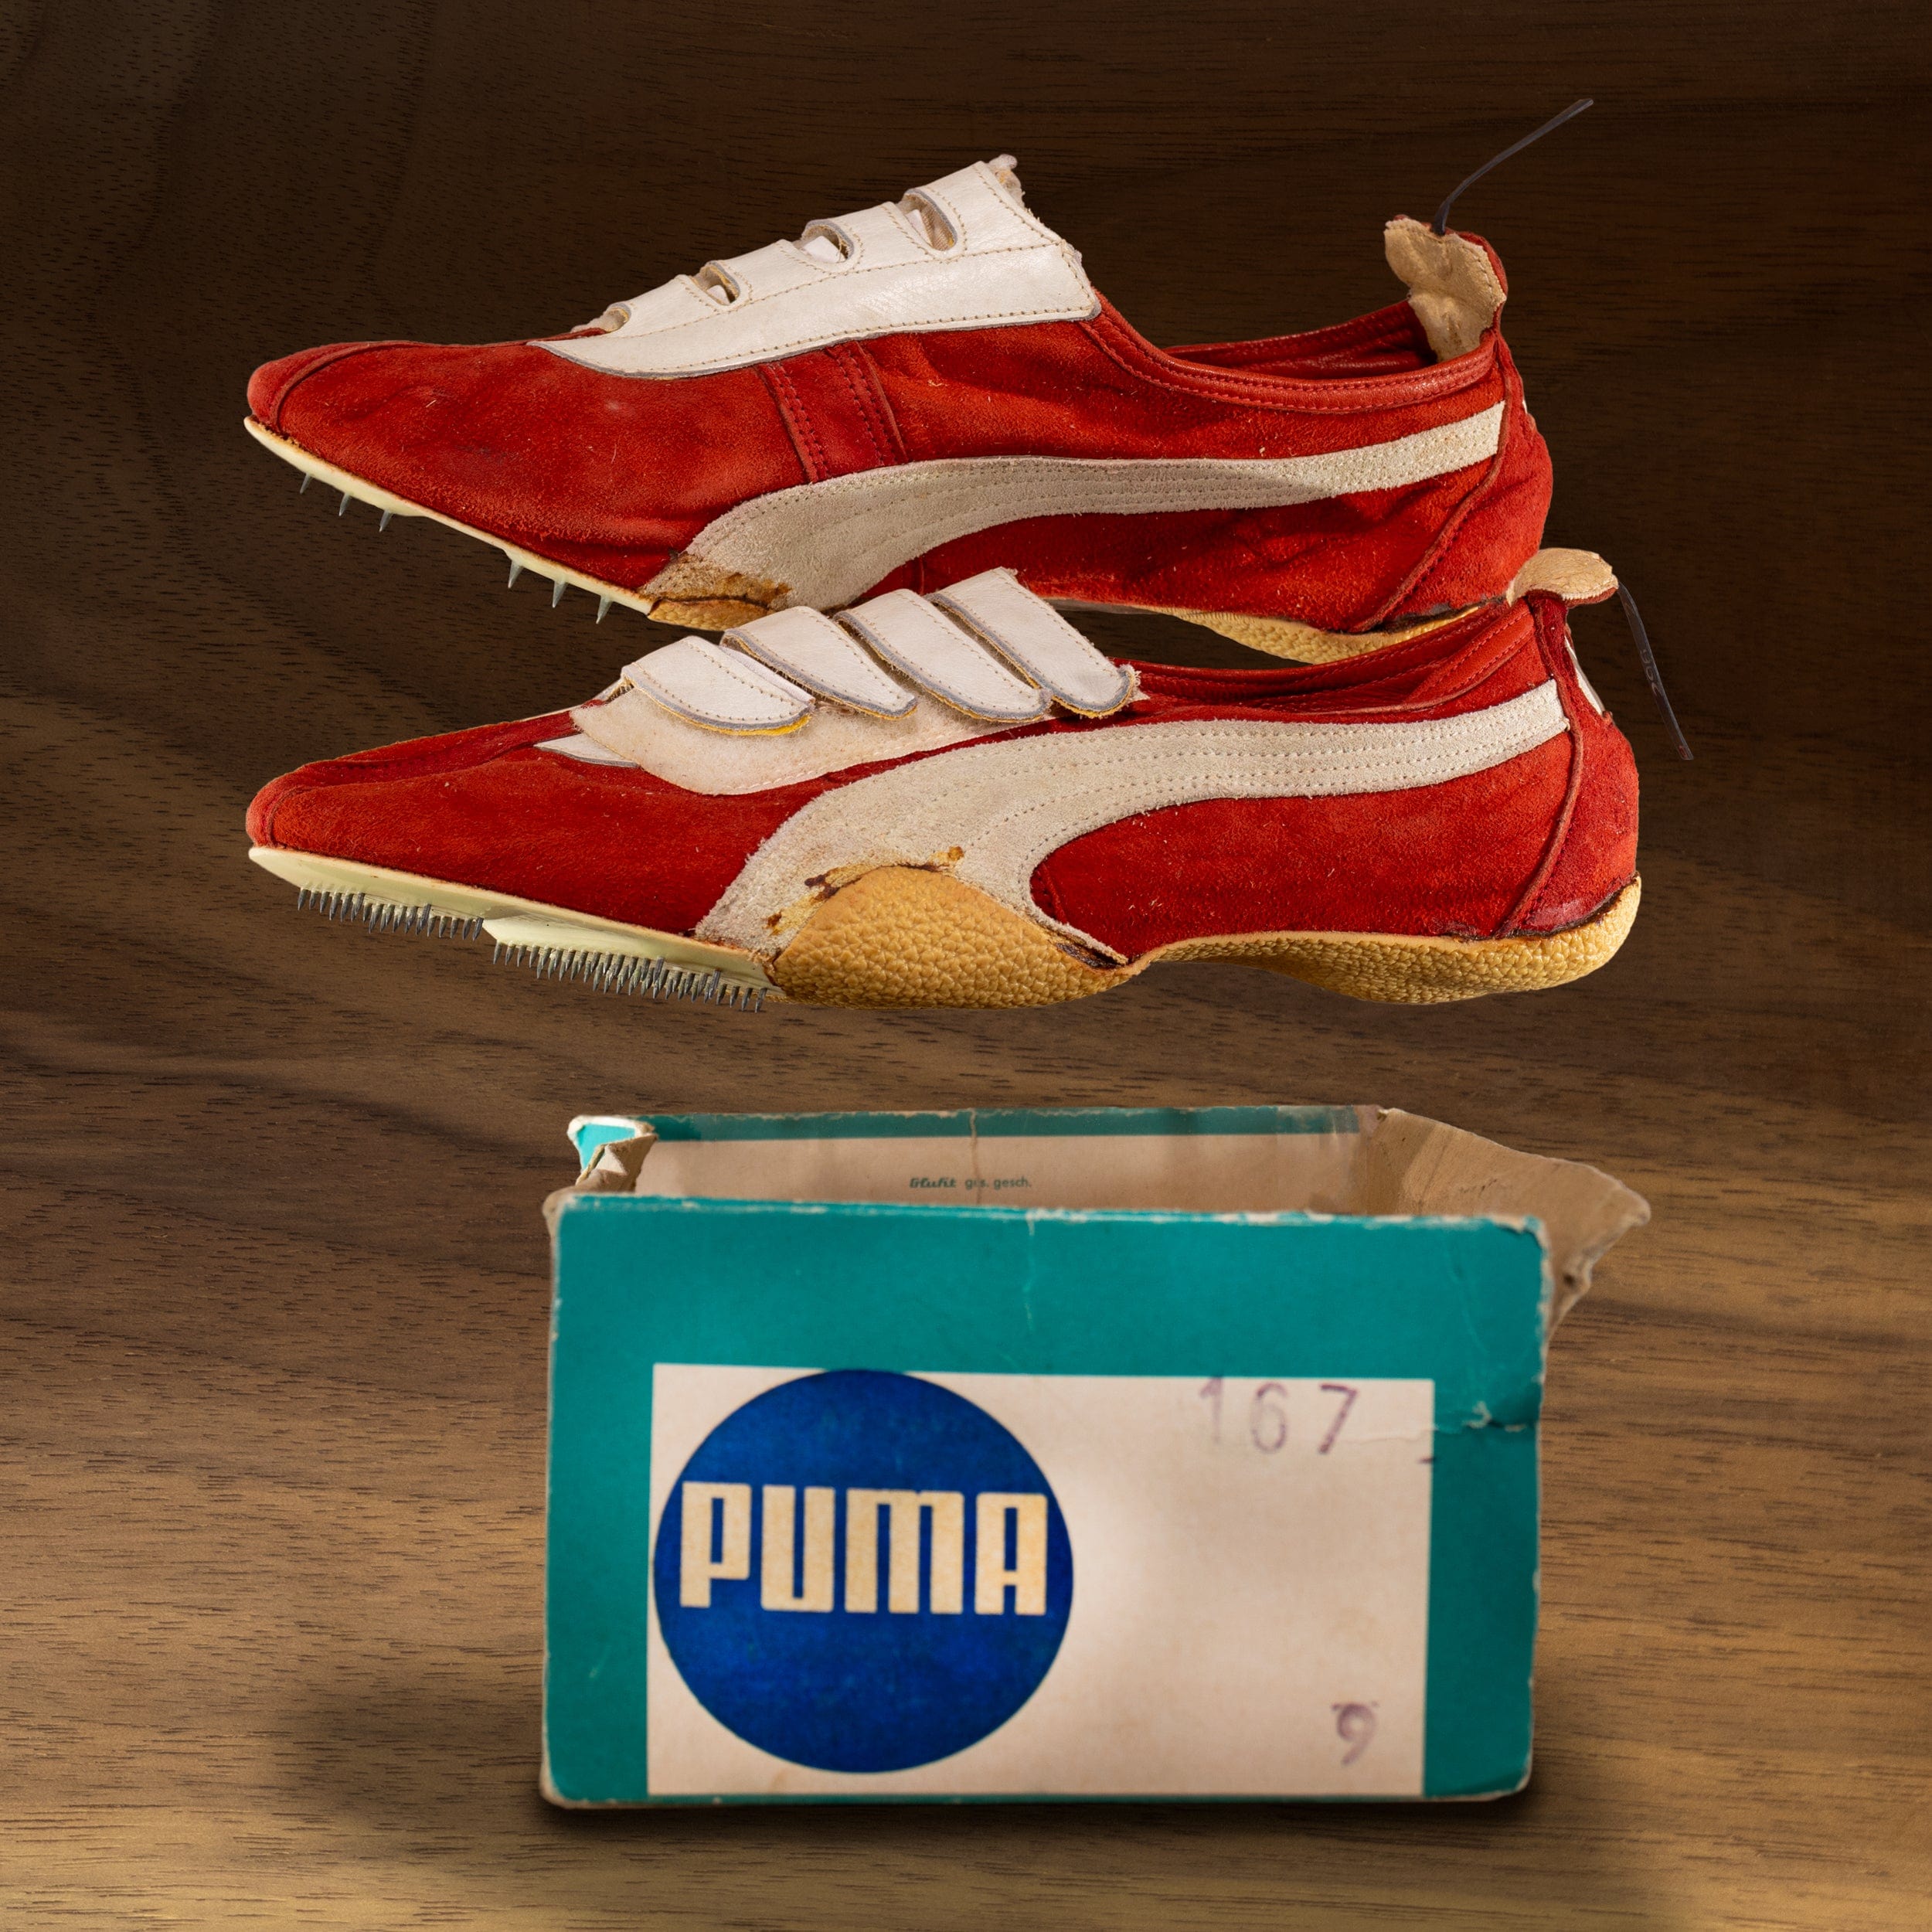 1968 Puma Olympic Track Shoe with banned "Brush" – Gold & Silver Pawn Shop